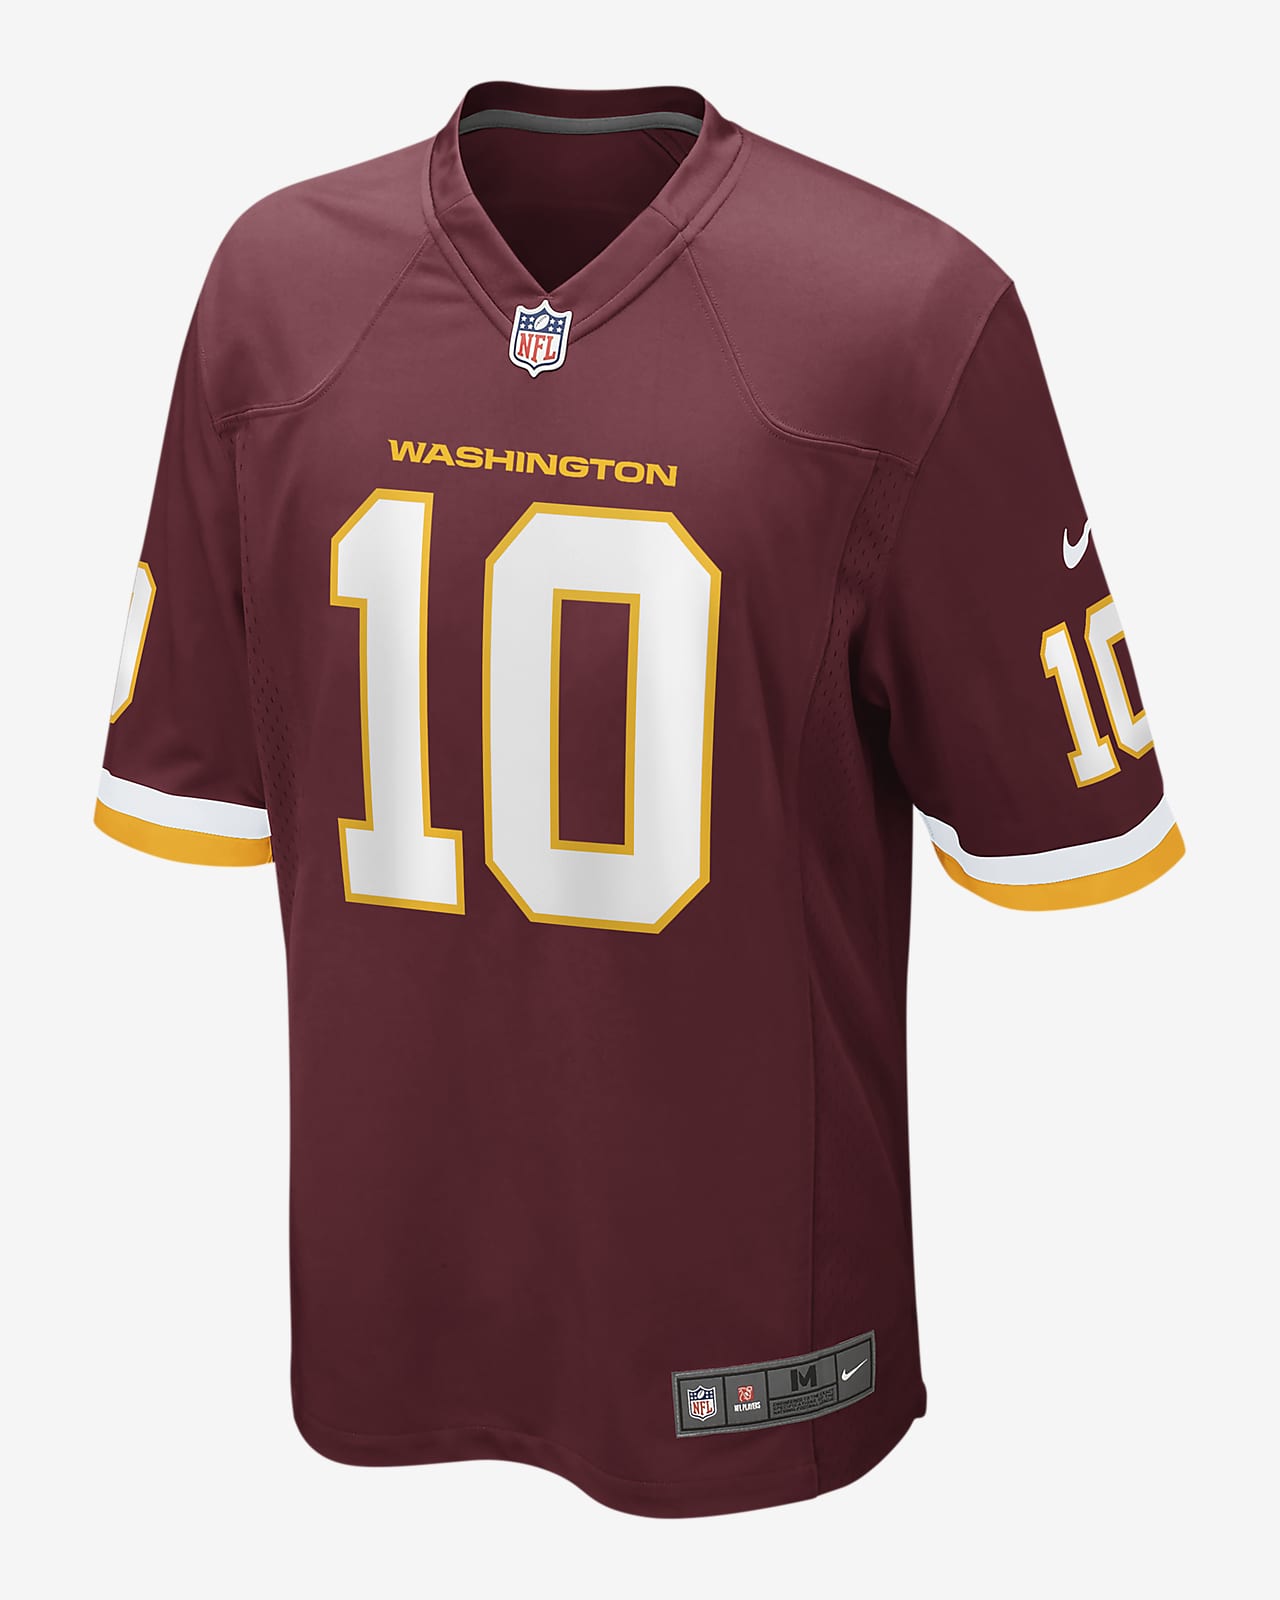 best redskins jersey to buy